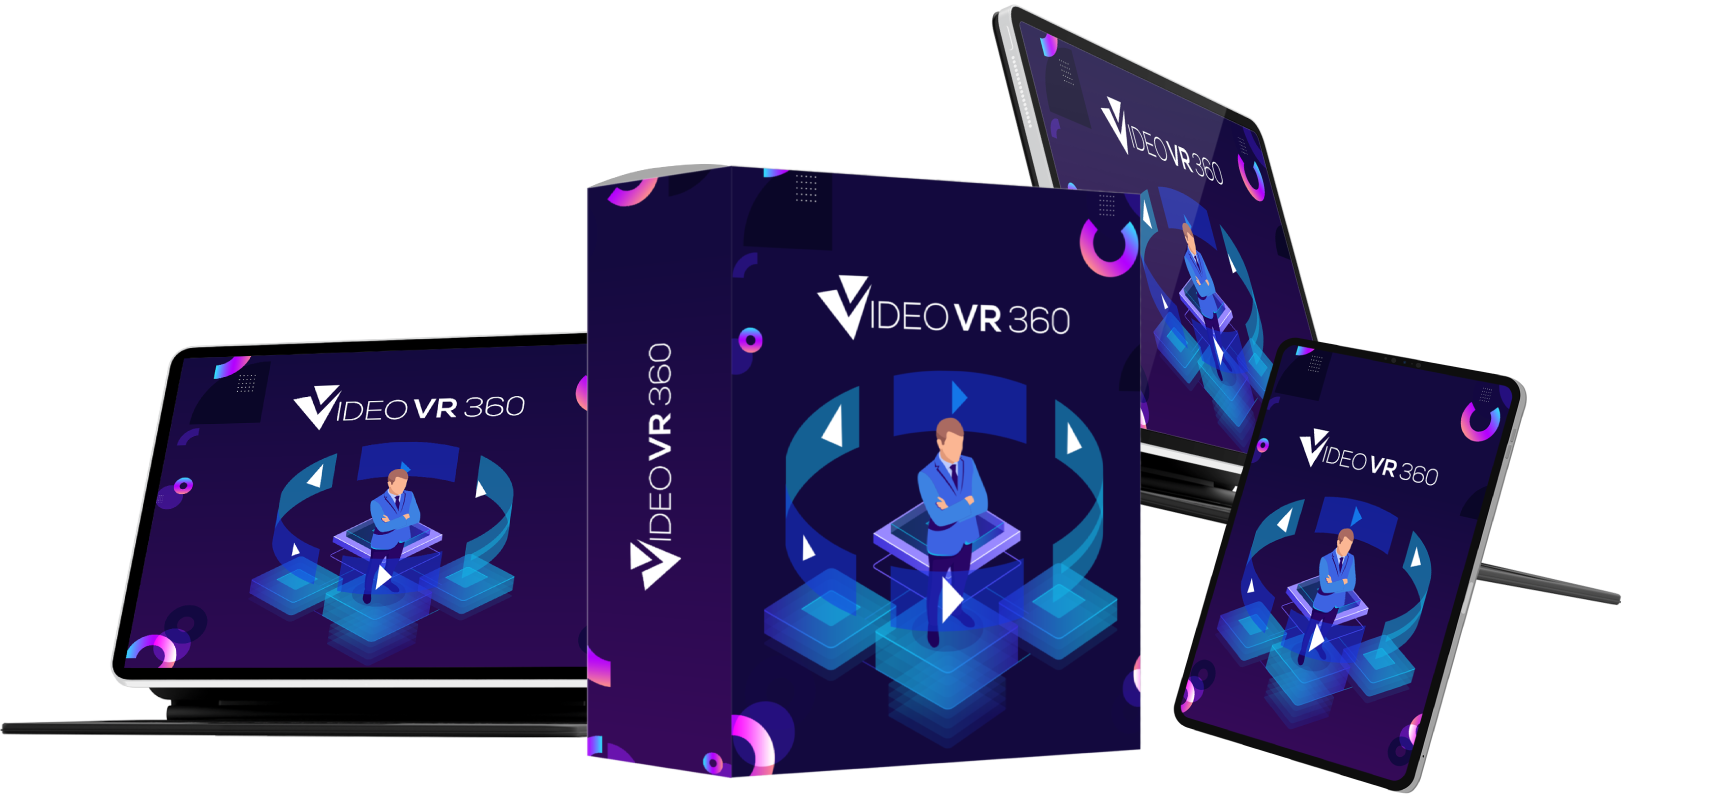 Video VR 360 Review – Best #1 App That Creates Interactive Virtual Tours & Stores With Built-In LIVE Video Call Technology In Just Minutes!